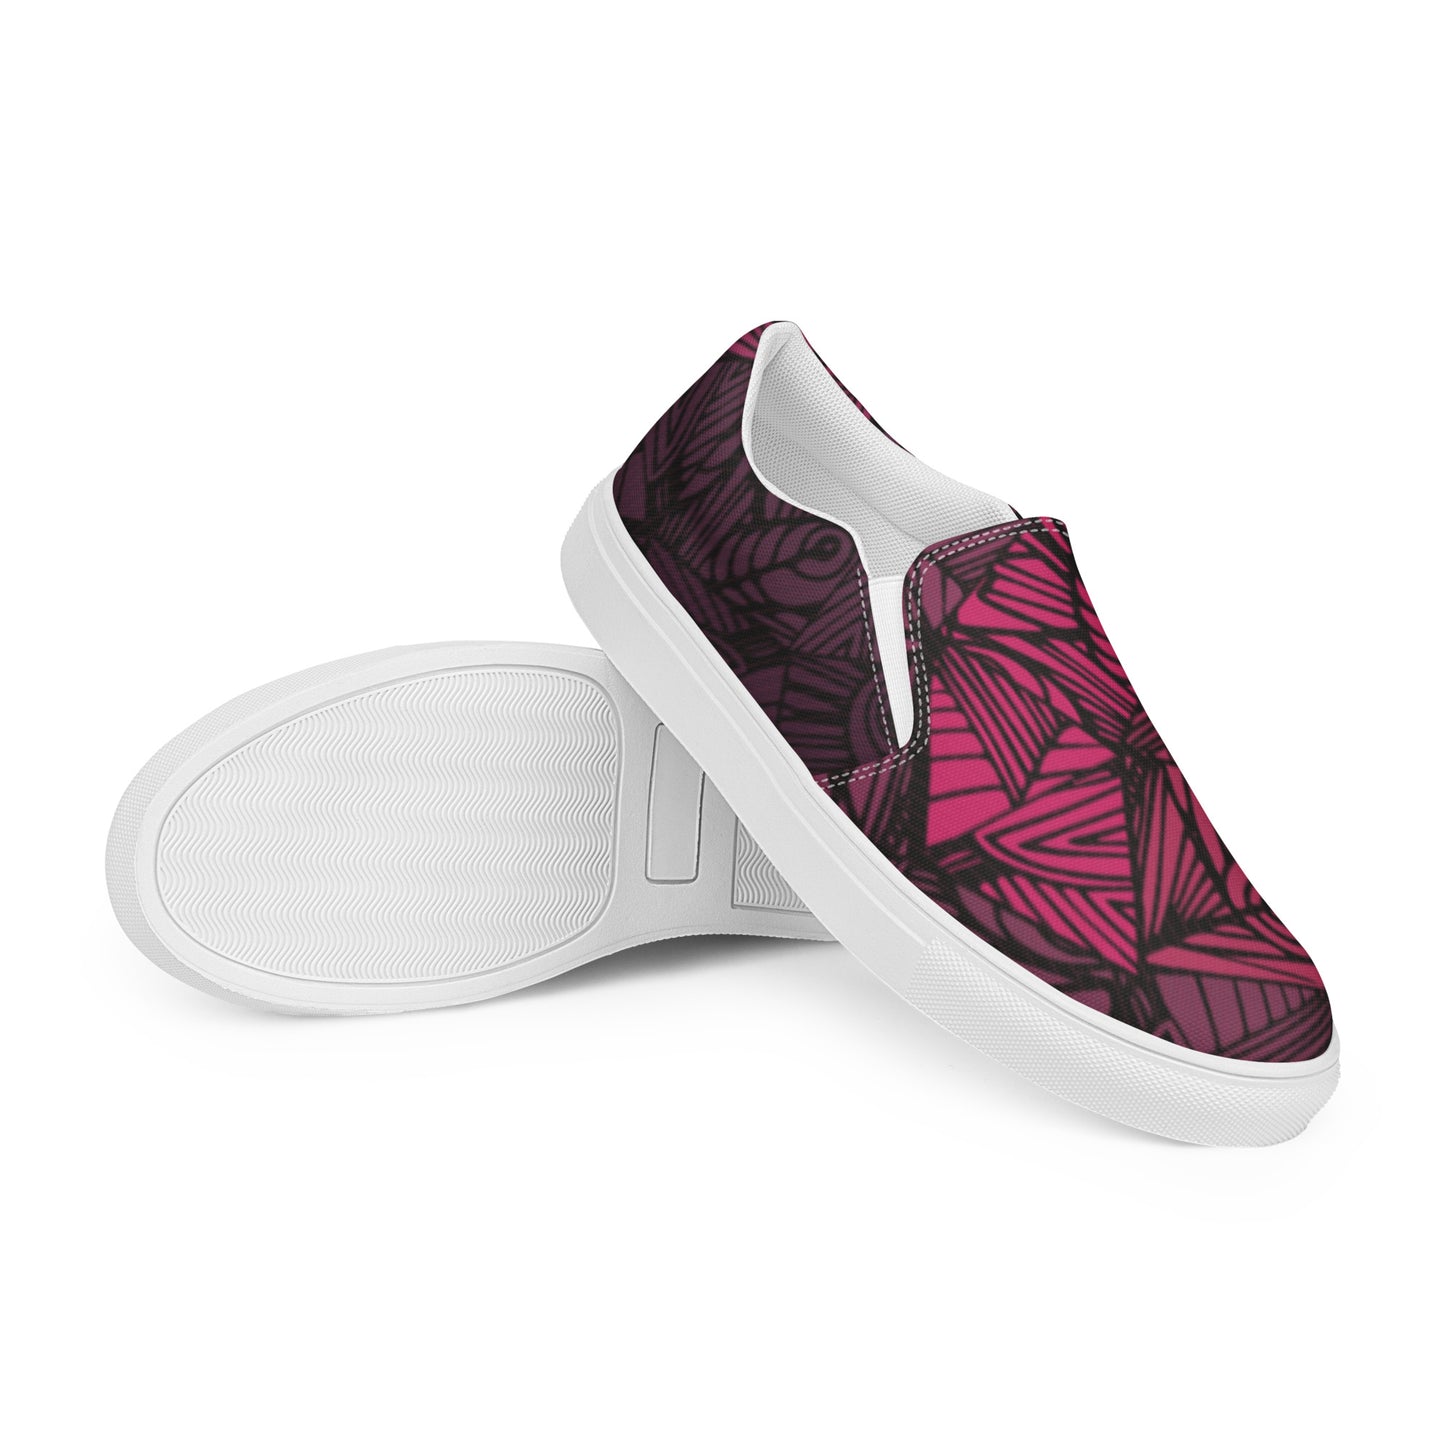 Worldtown Guaranteed To Dream Women’s slip-on canvas shoes